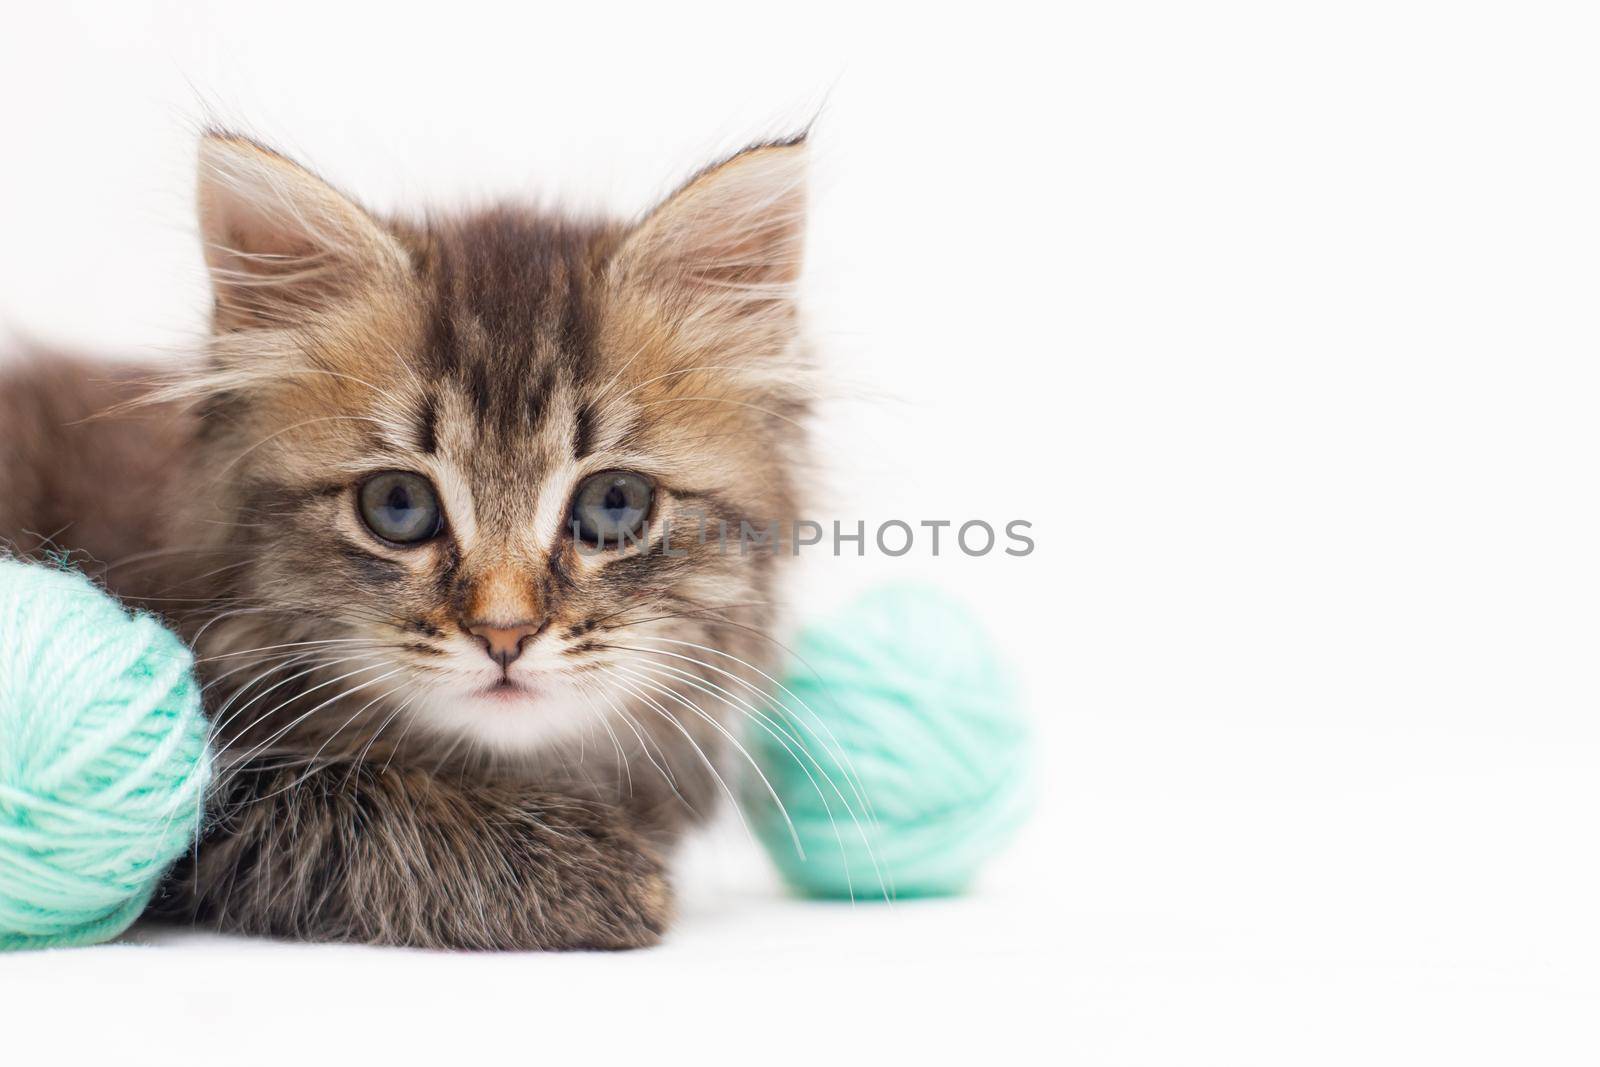 Striped cat with blue balls, skeins of thread on a white bed. An article about kittens. An article about pets. A curious little kitten looking into the camera. Cat